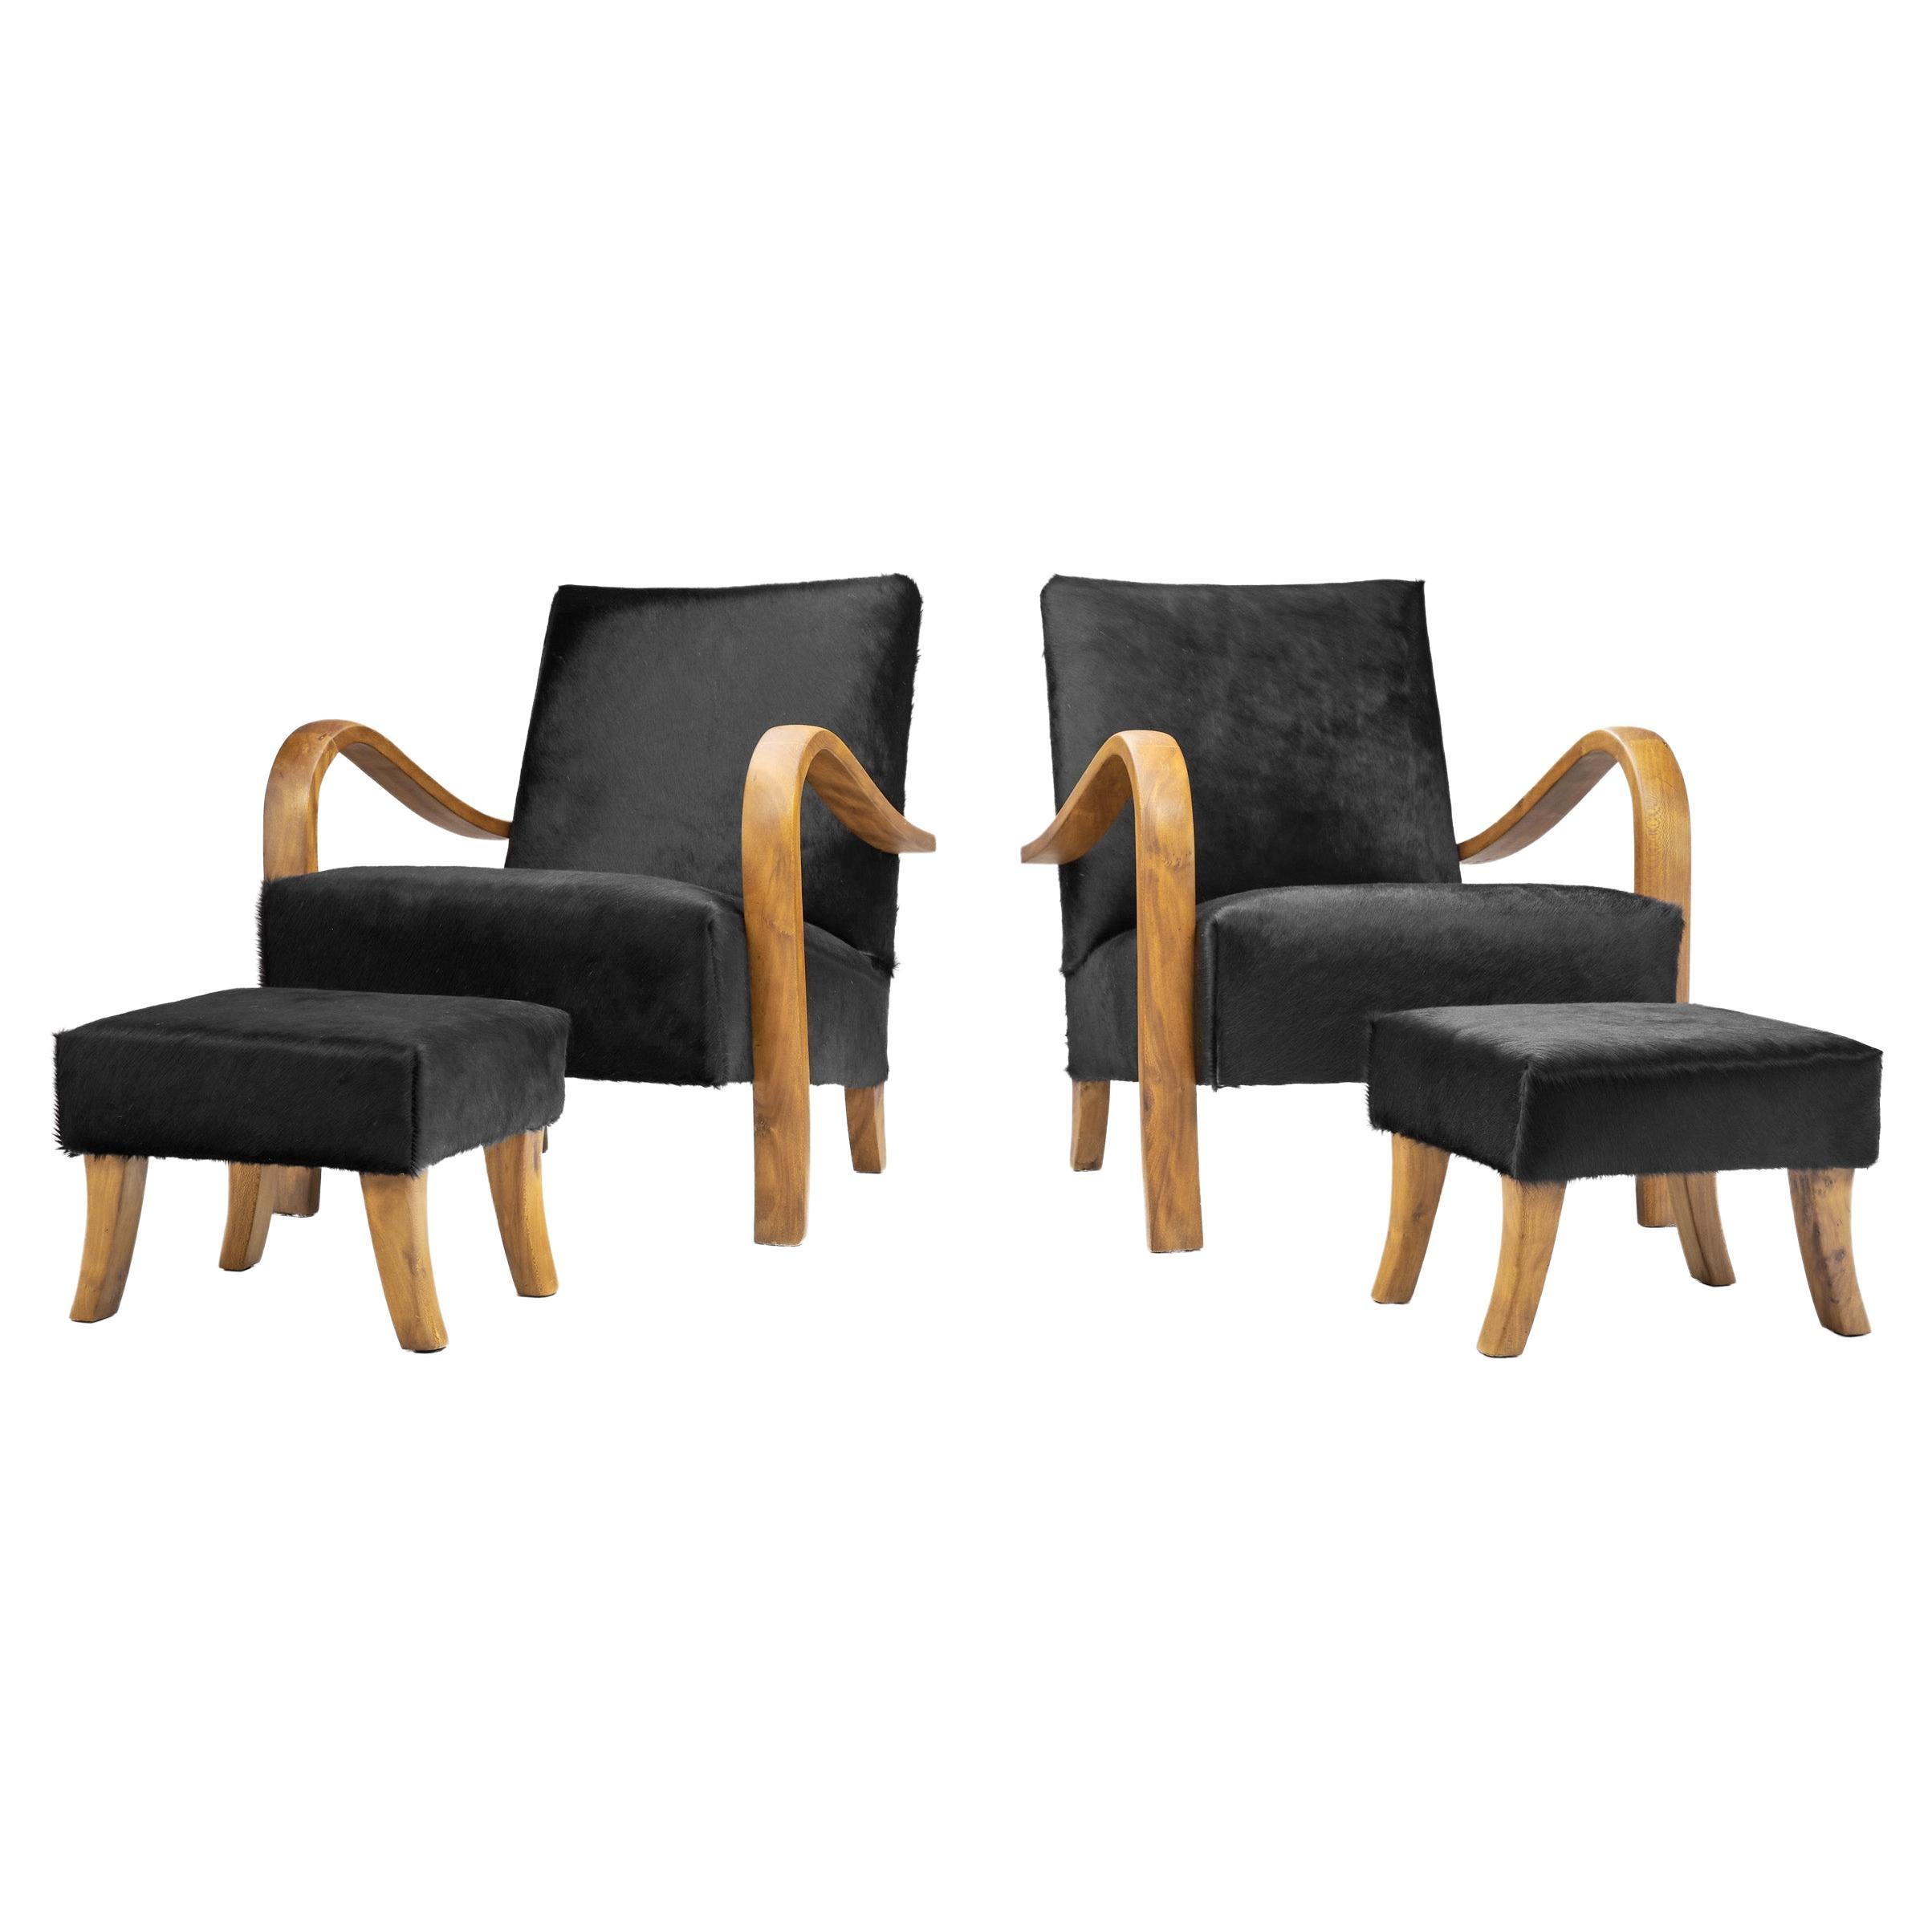 Italian Cherry Wood Lounge Chairs with Foot Stools in Dark Cowhide, Italy 1950s